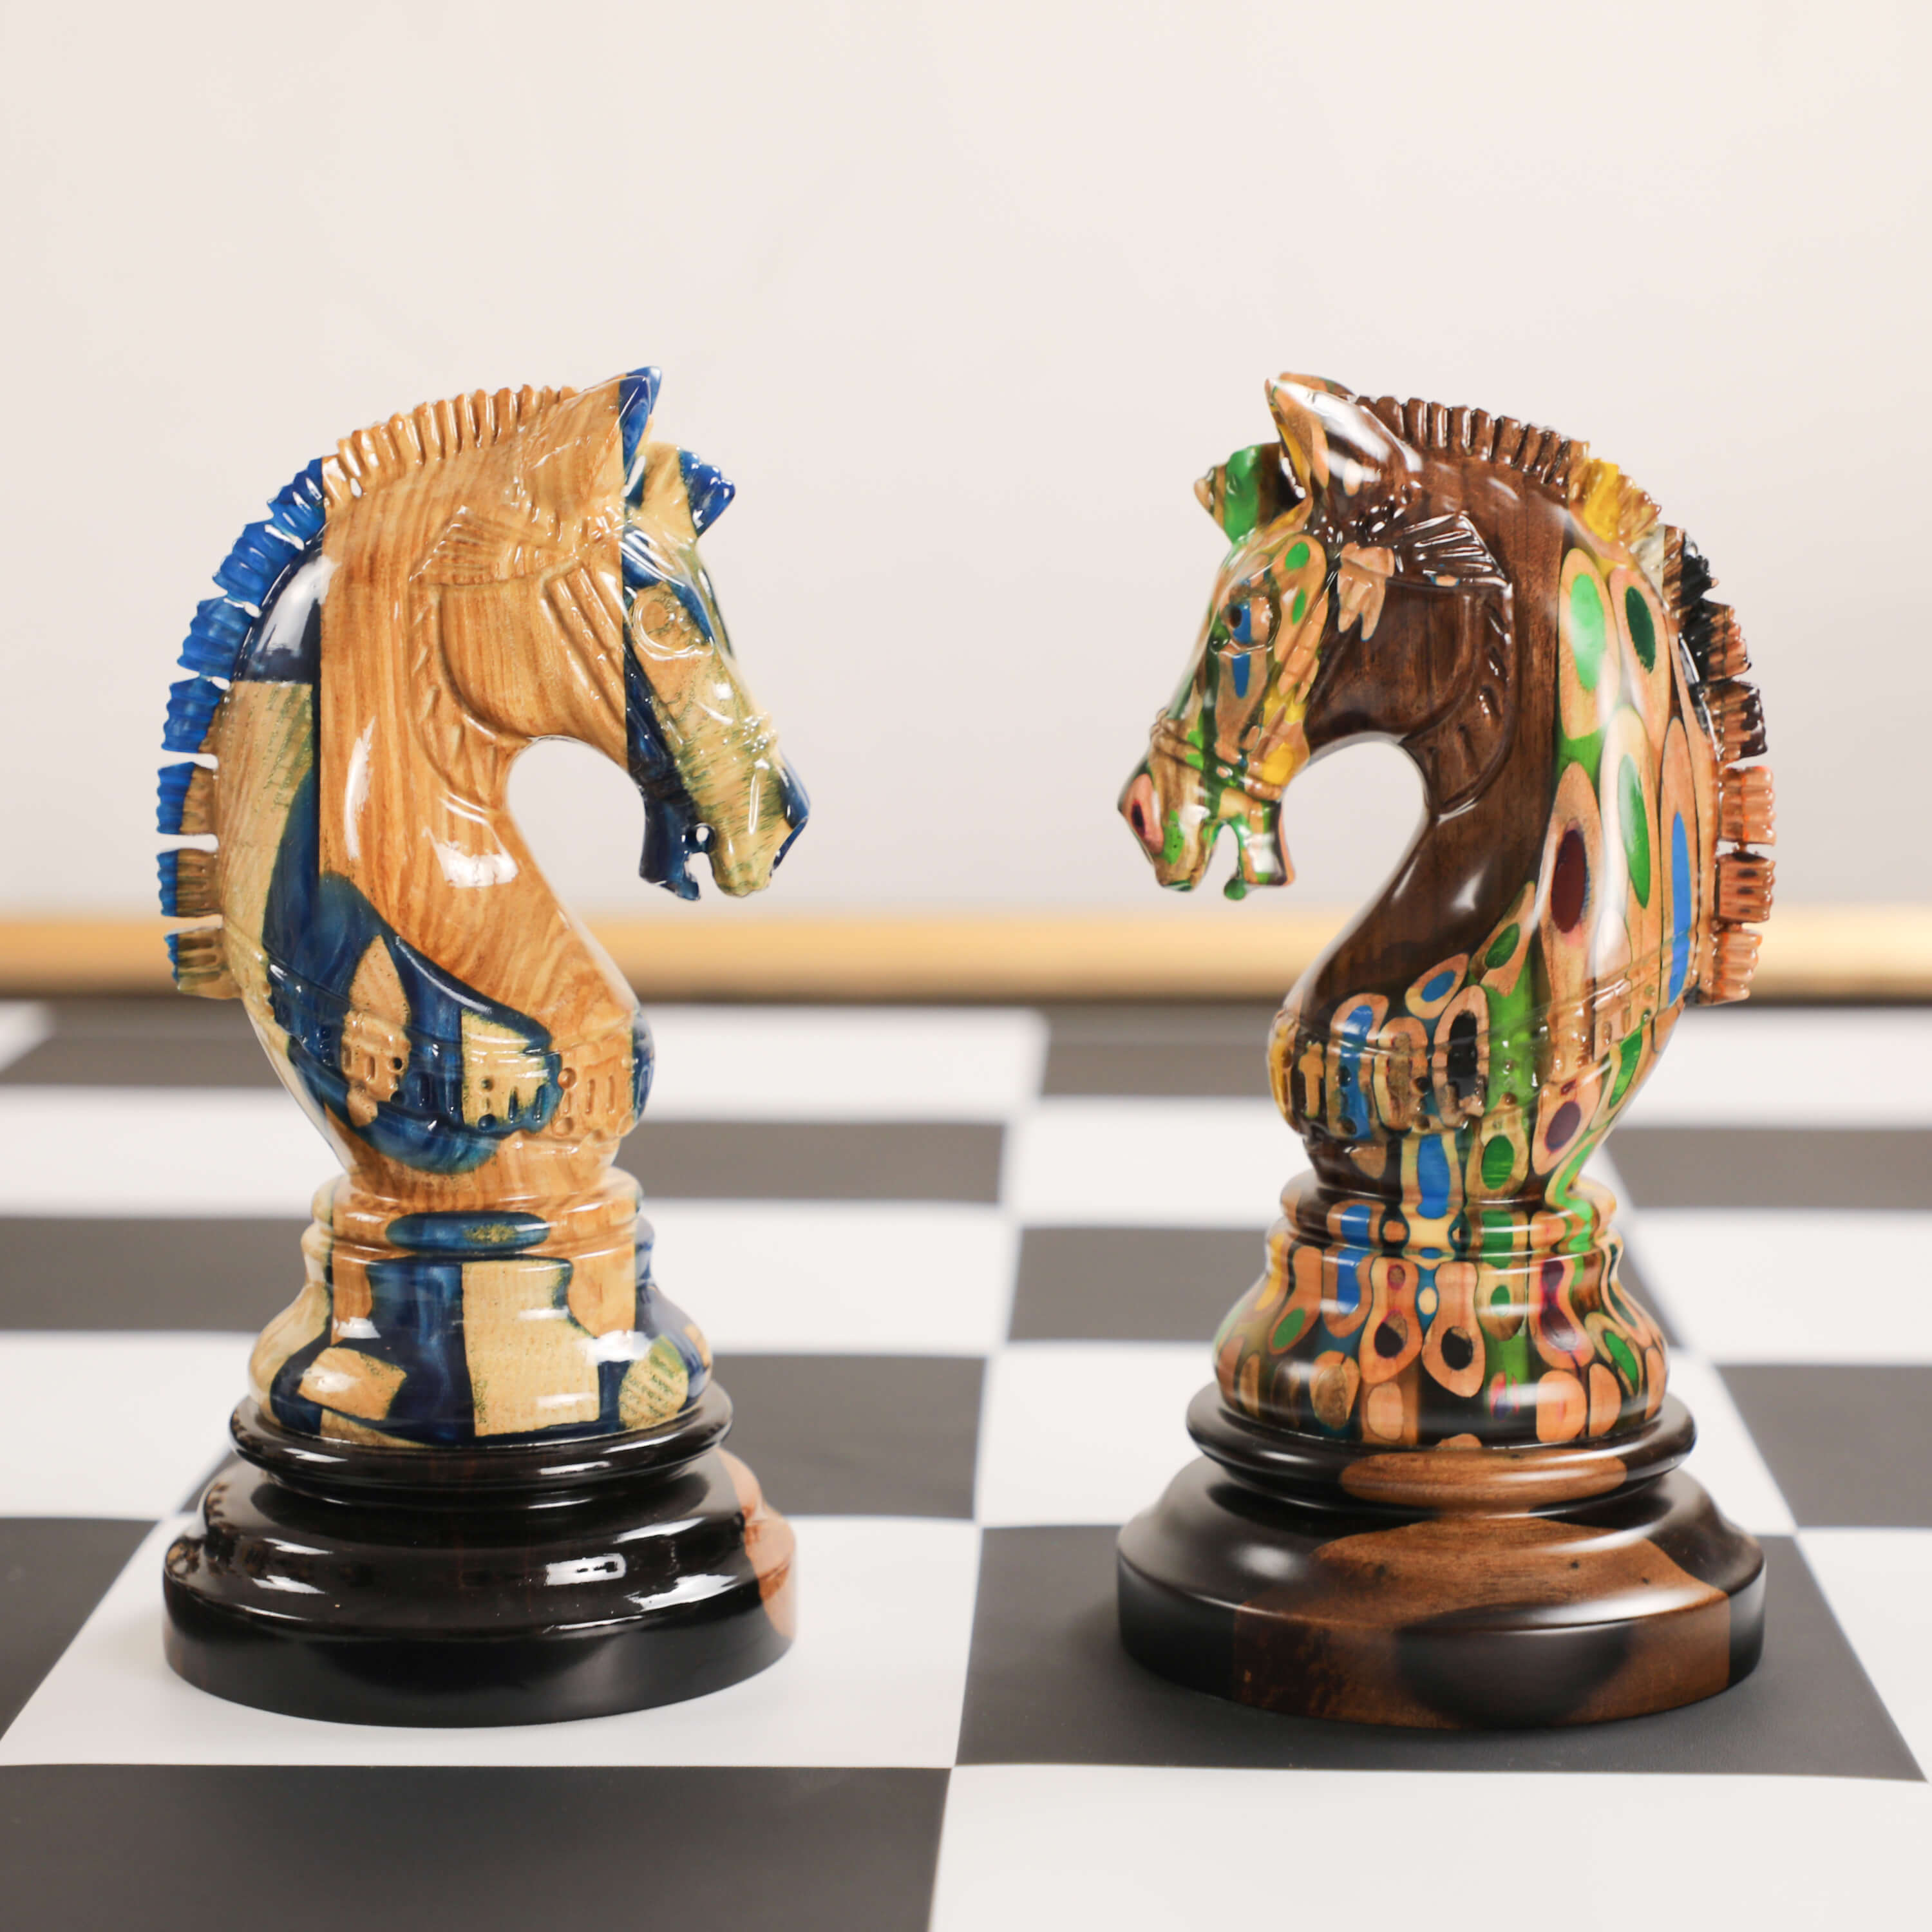 Giant Chess Pieces Resin & Wilshire